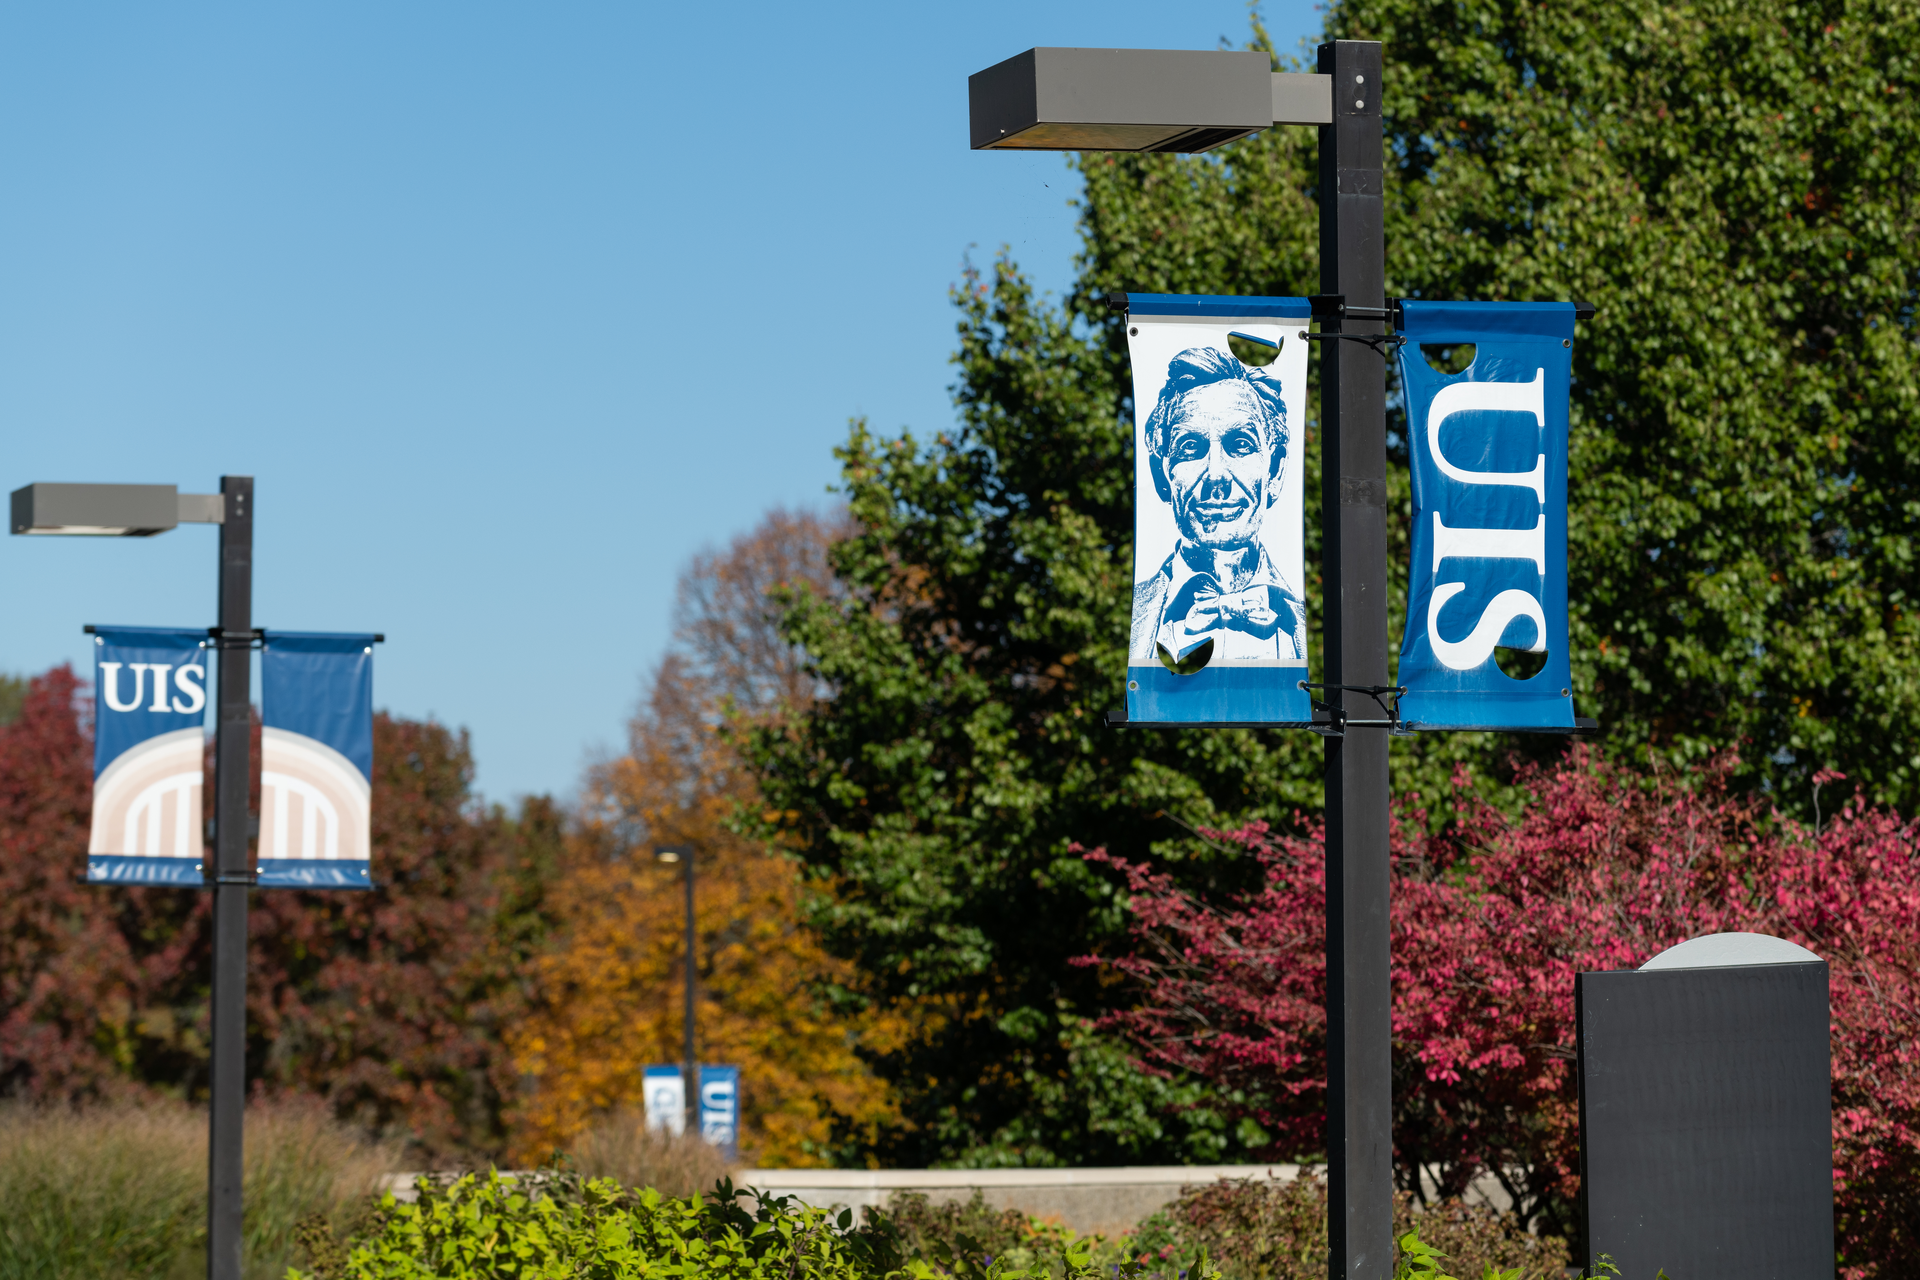 UIS banners hanging on two light poles with multicolored trees in the background.